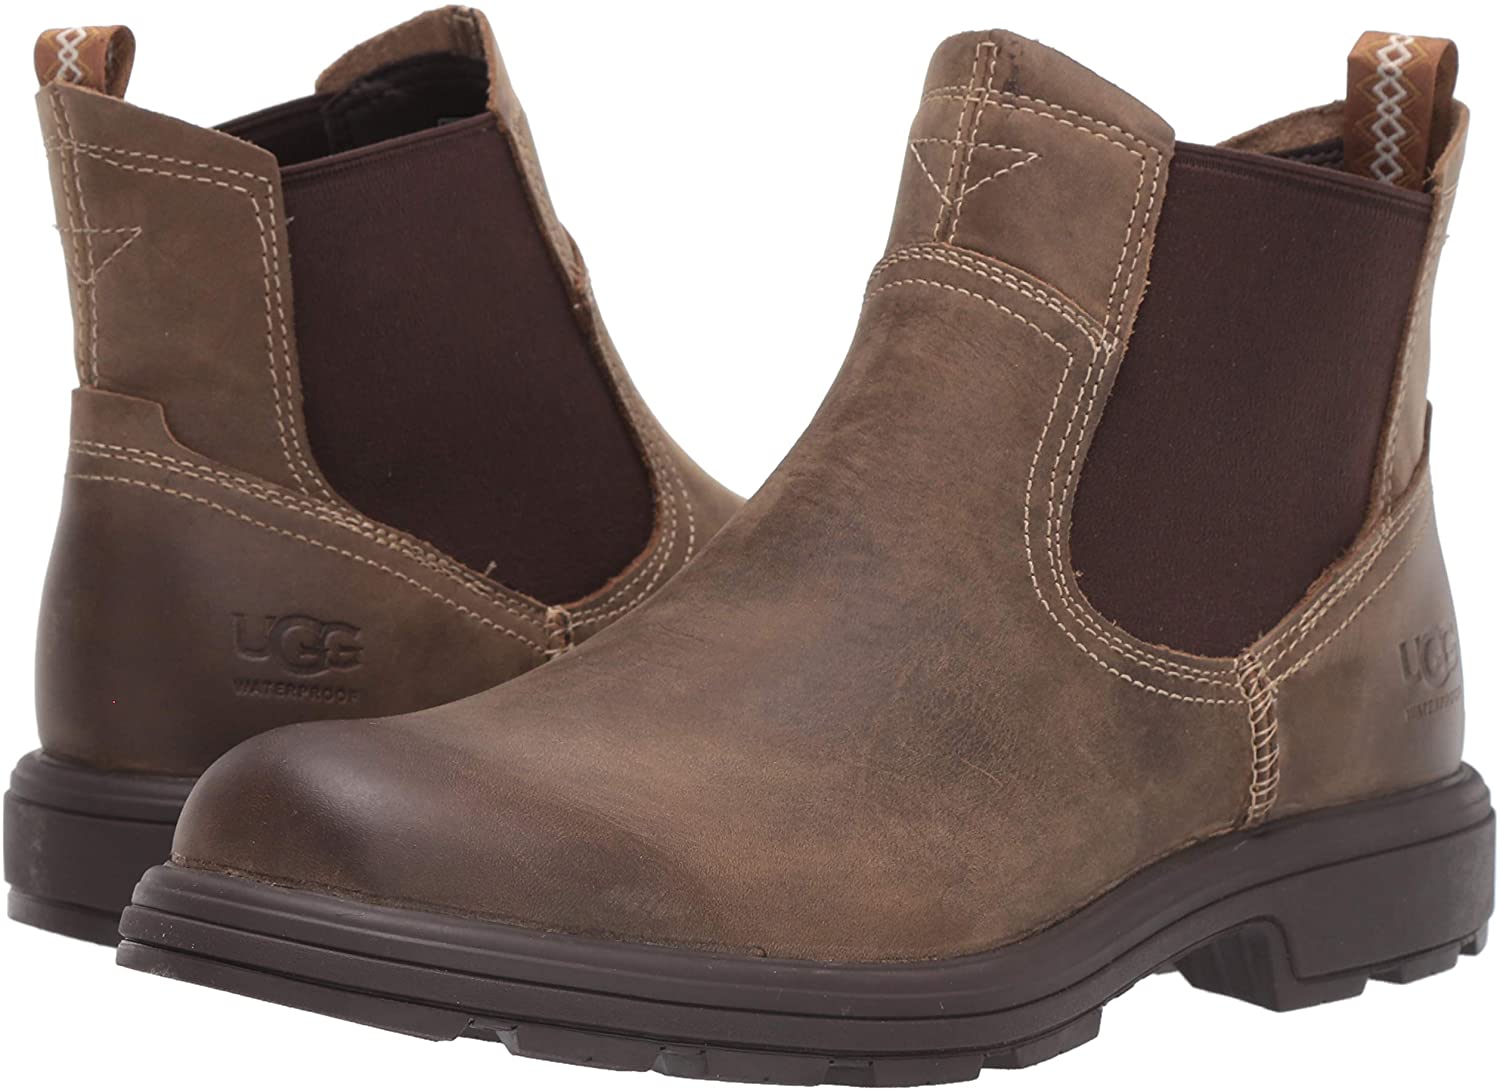 UGG Men's Biltmore Chelsea Boot (Military Sand  Sizes 8.5 to 13) $52 + free s/h at Amazon